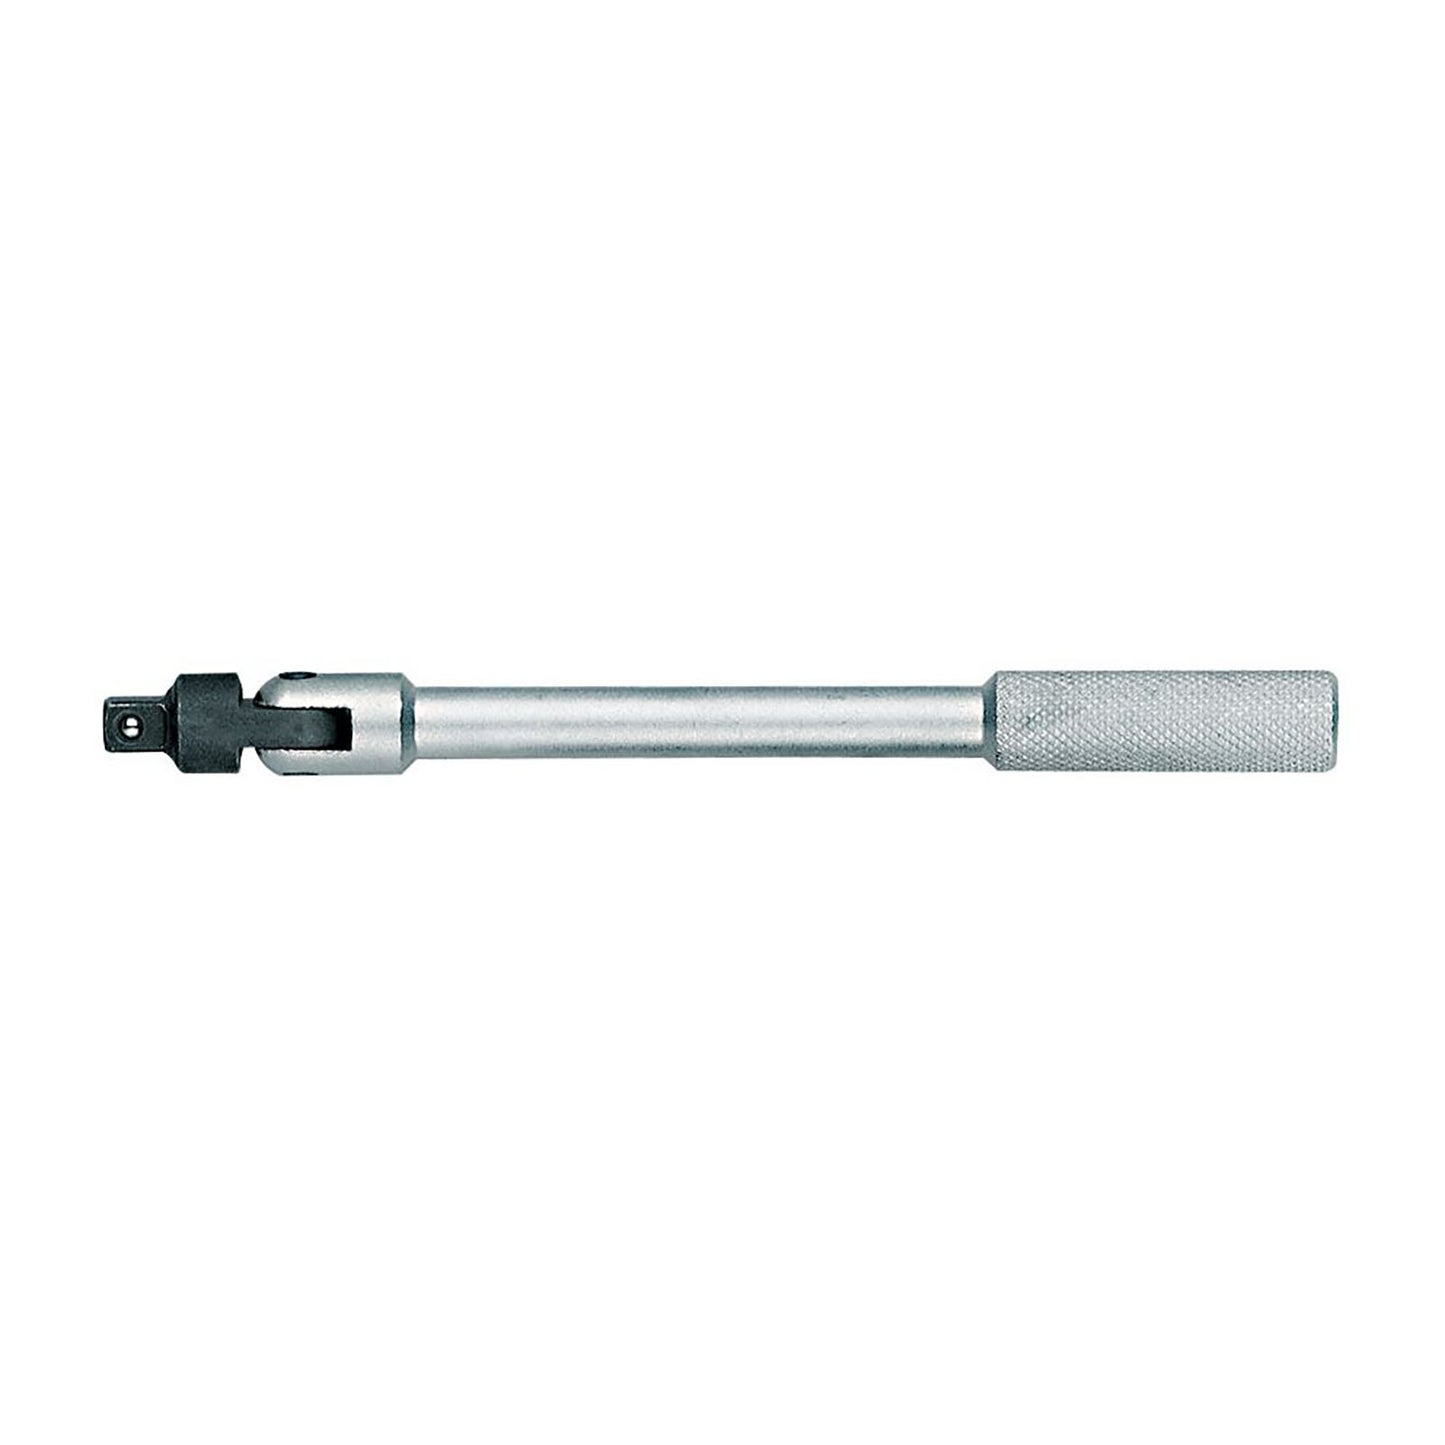 GEDORE 2097 - 1/4" Articulated Handle (6171050)